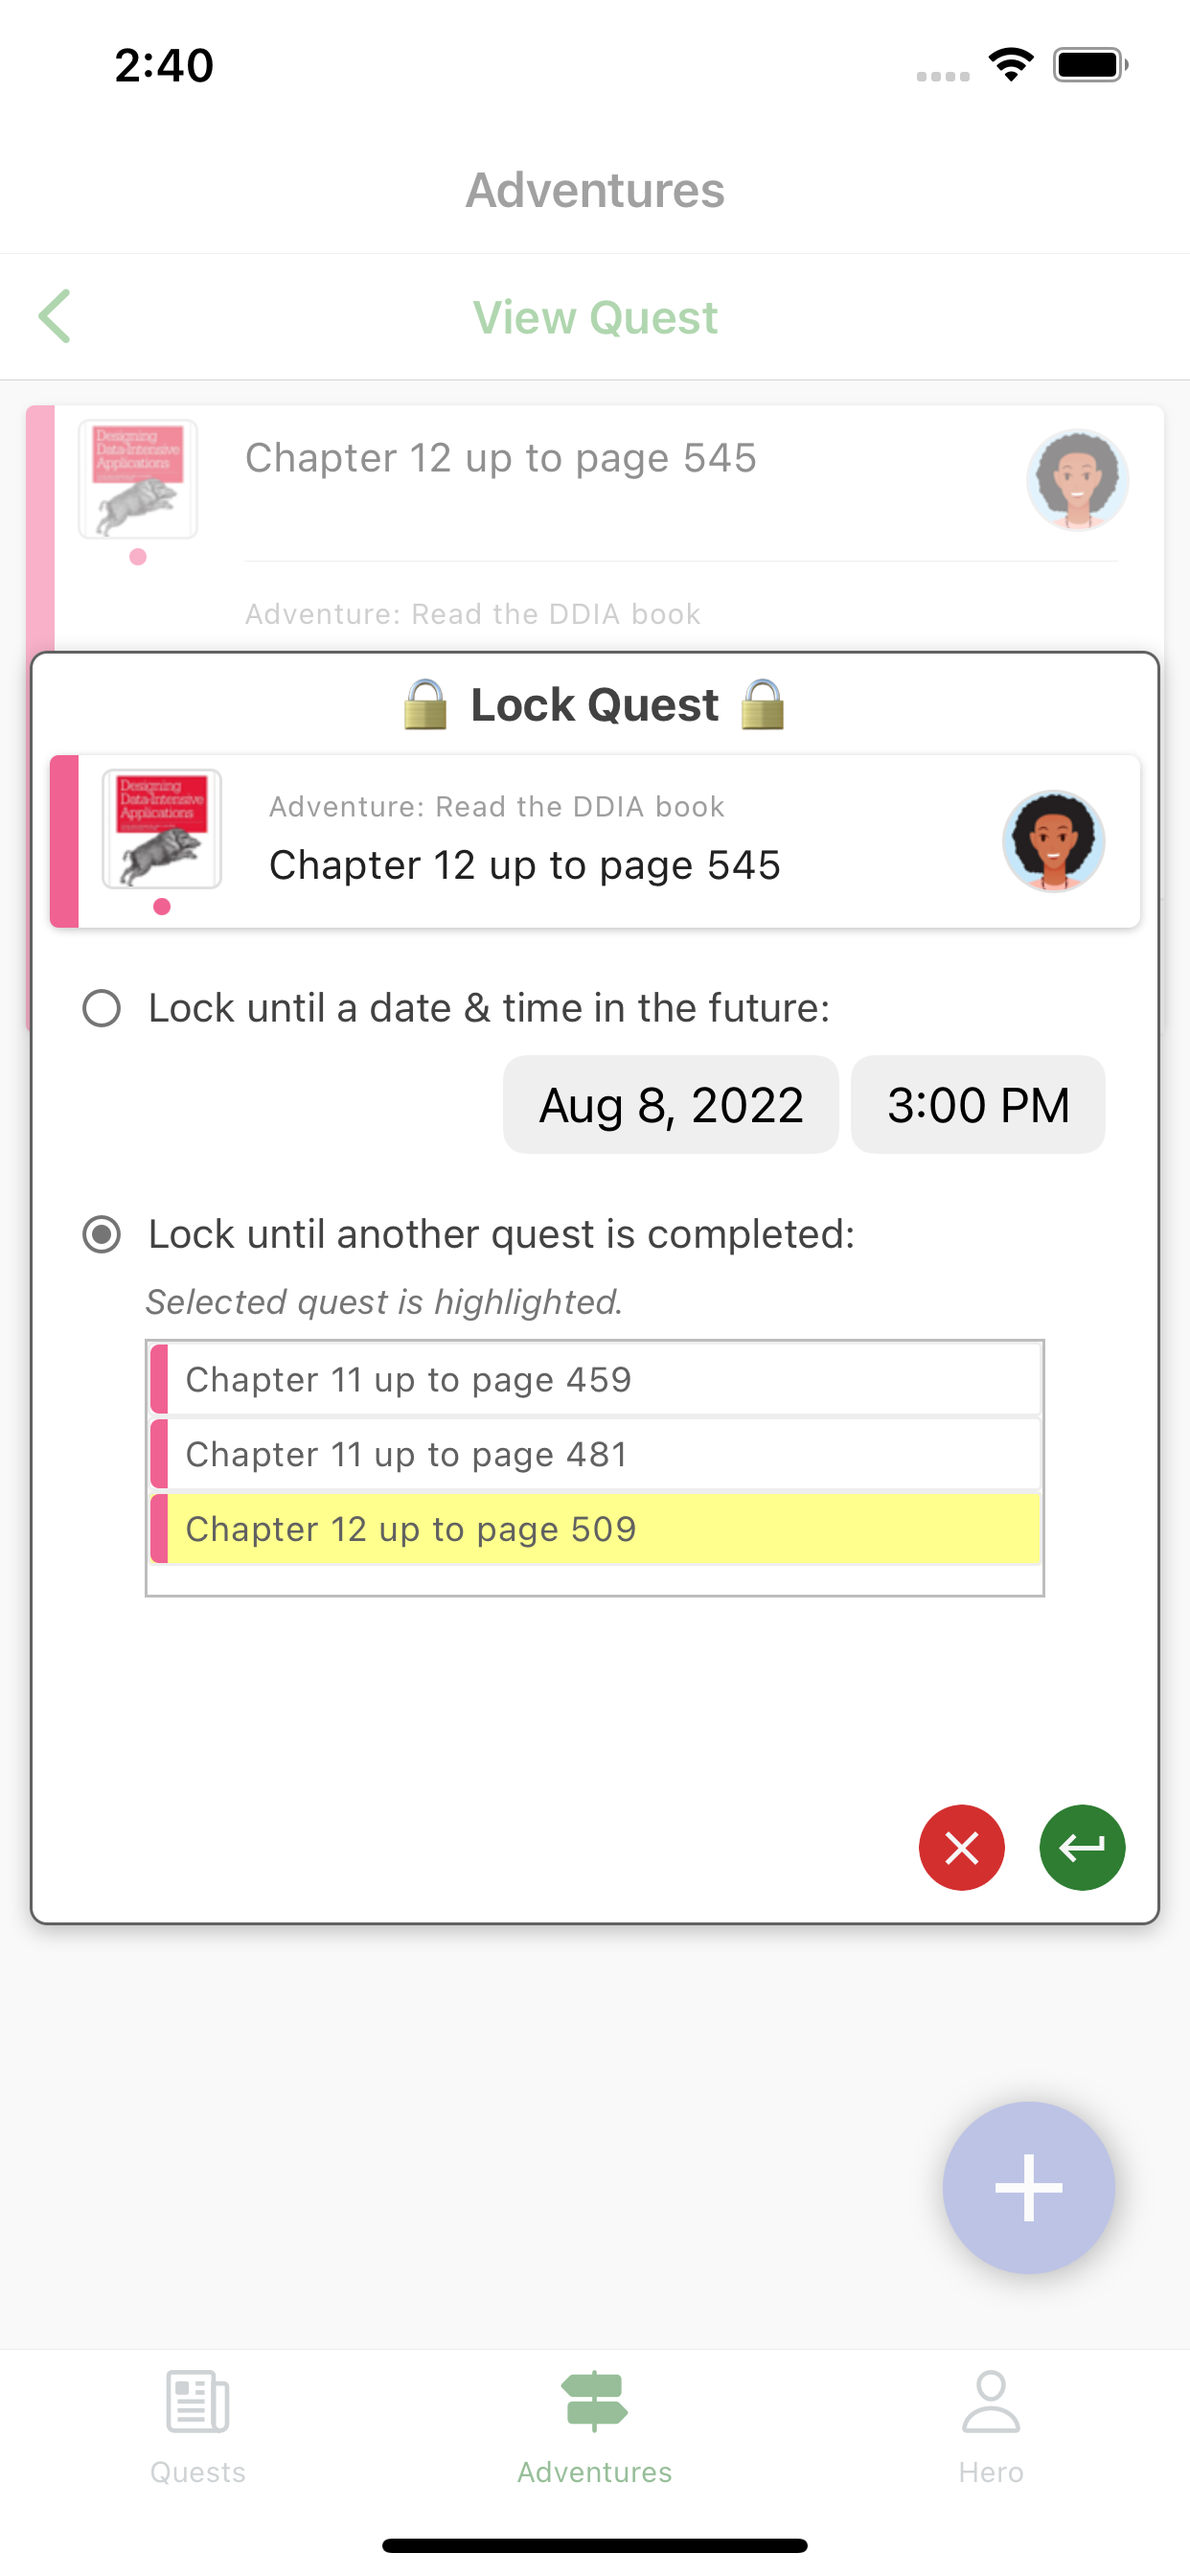 the quest locking functionality in heromode is used to manage reading goals and tasks